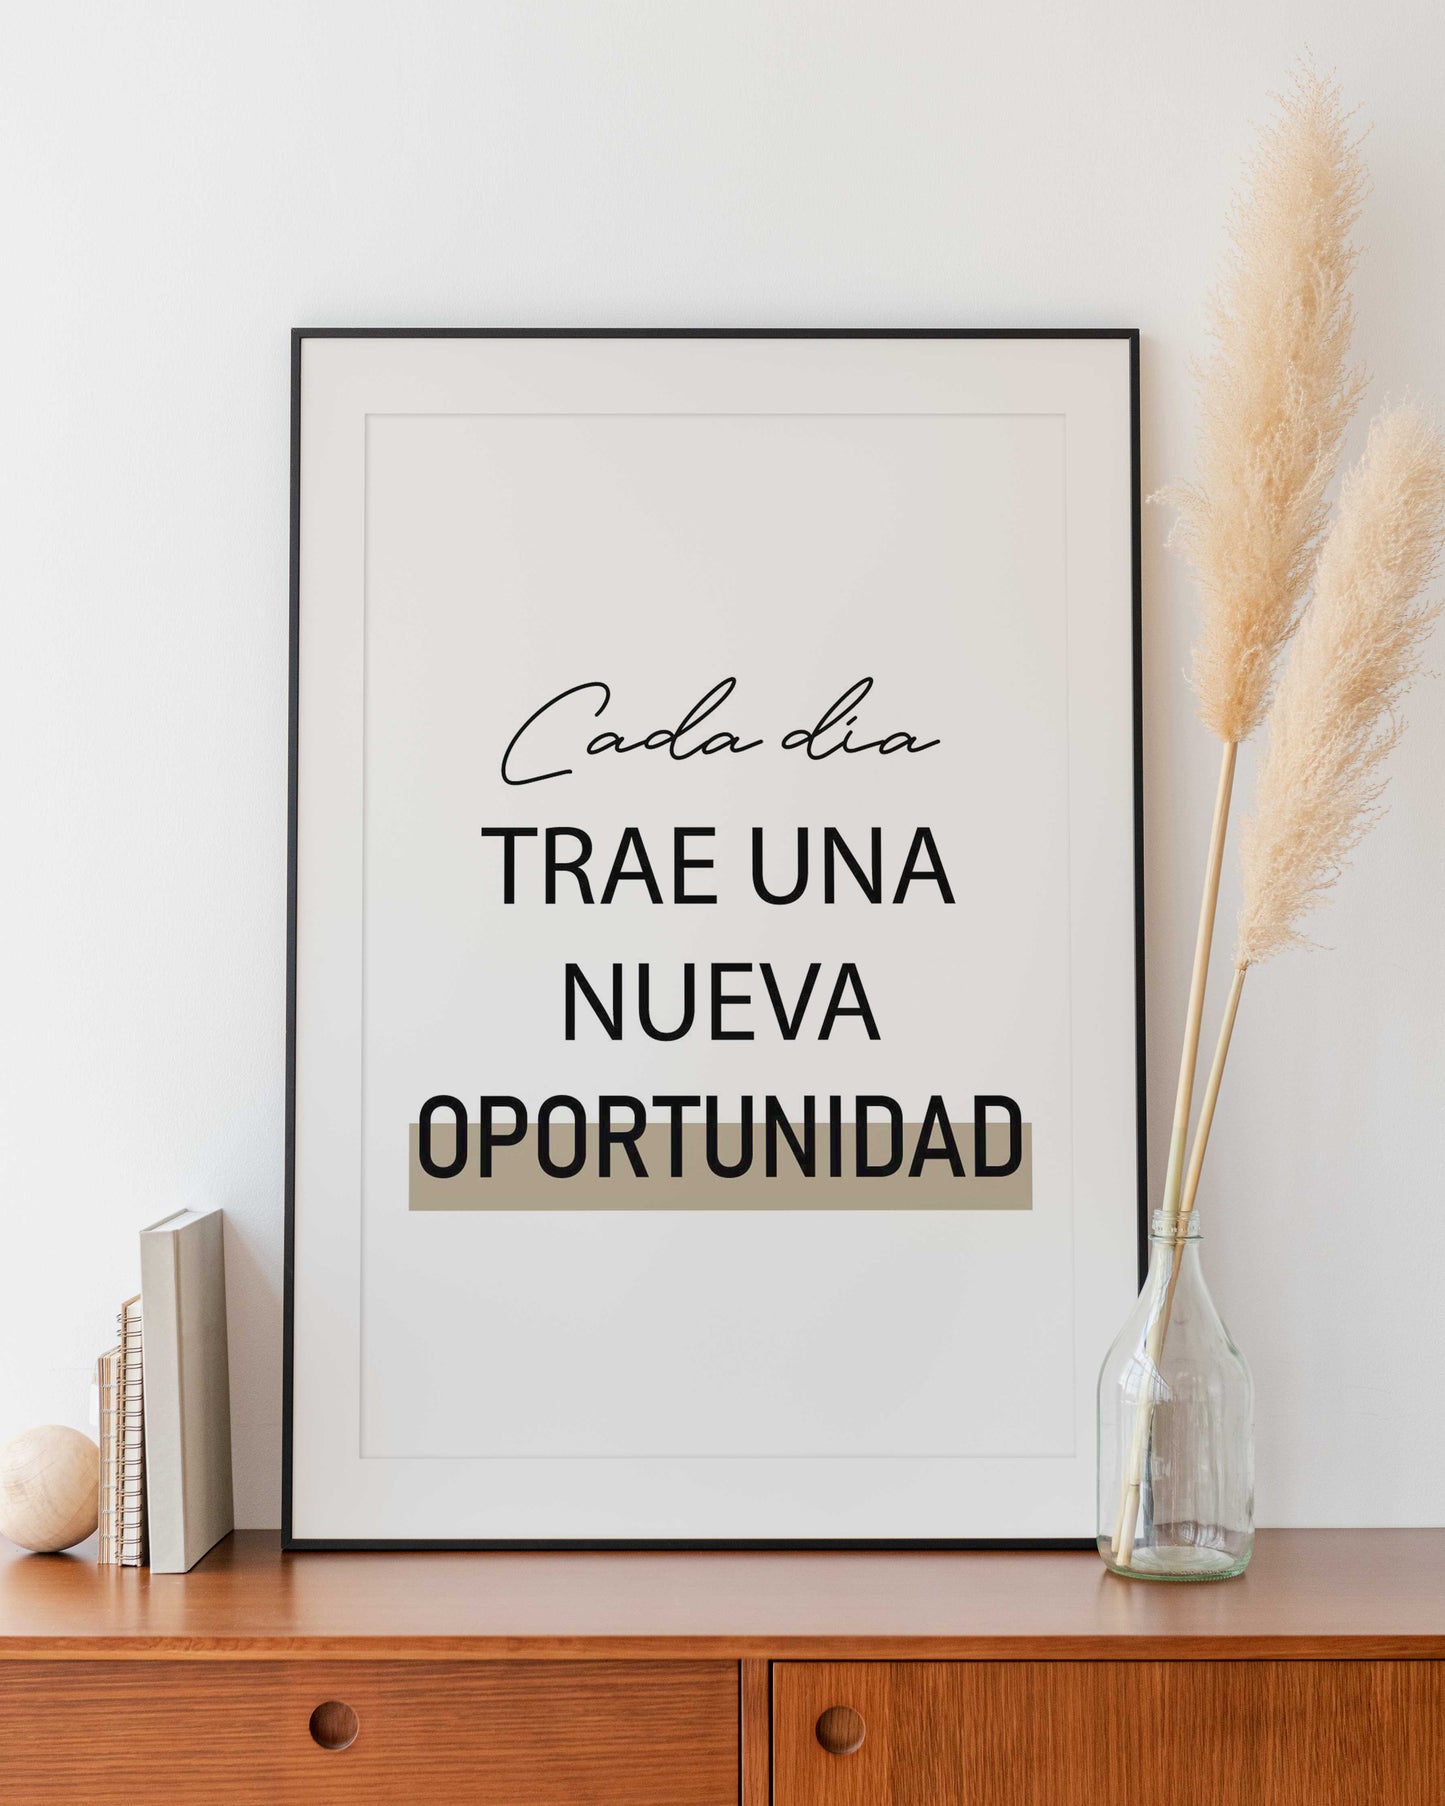 Every day brings a new opportunity Poster